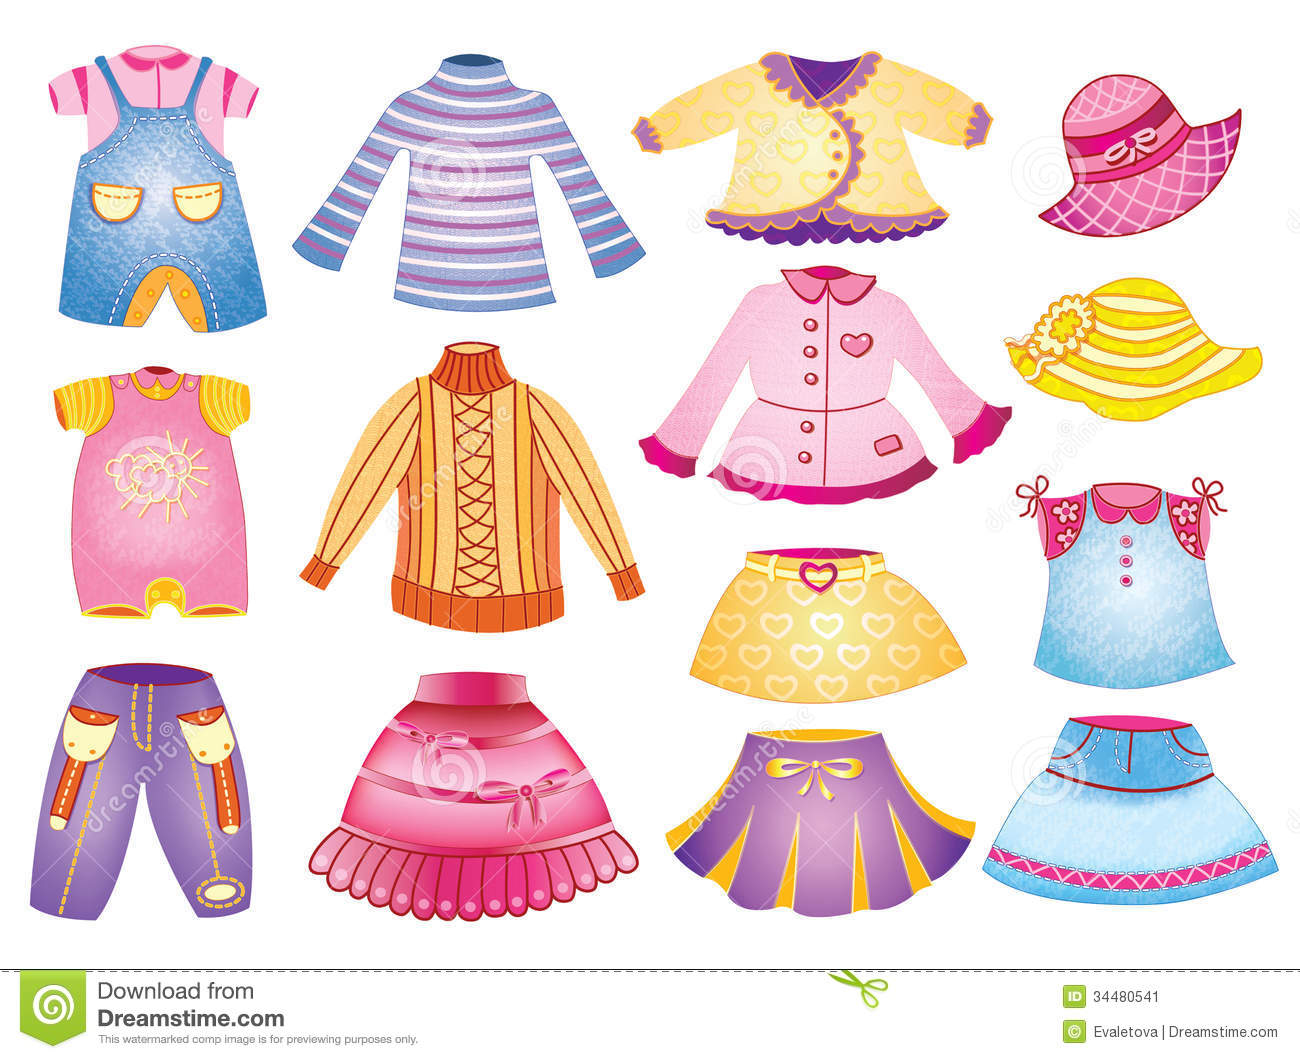 Kids clothes clipart free